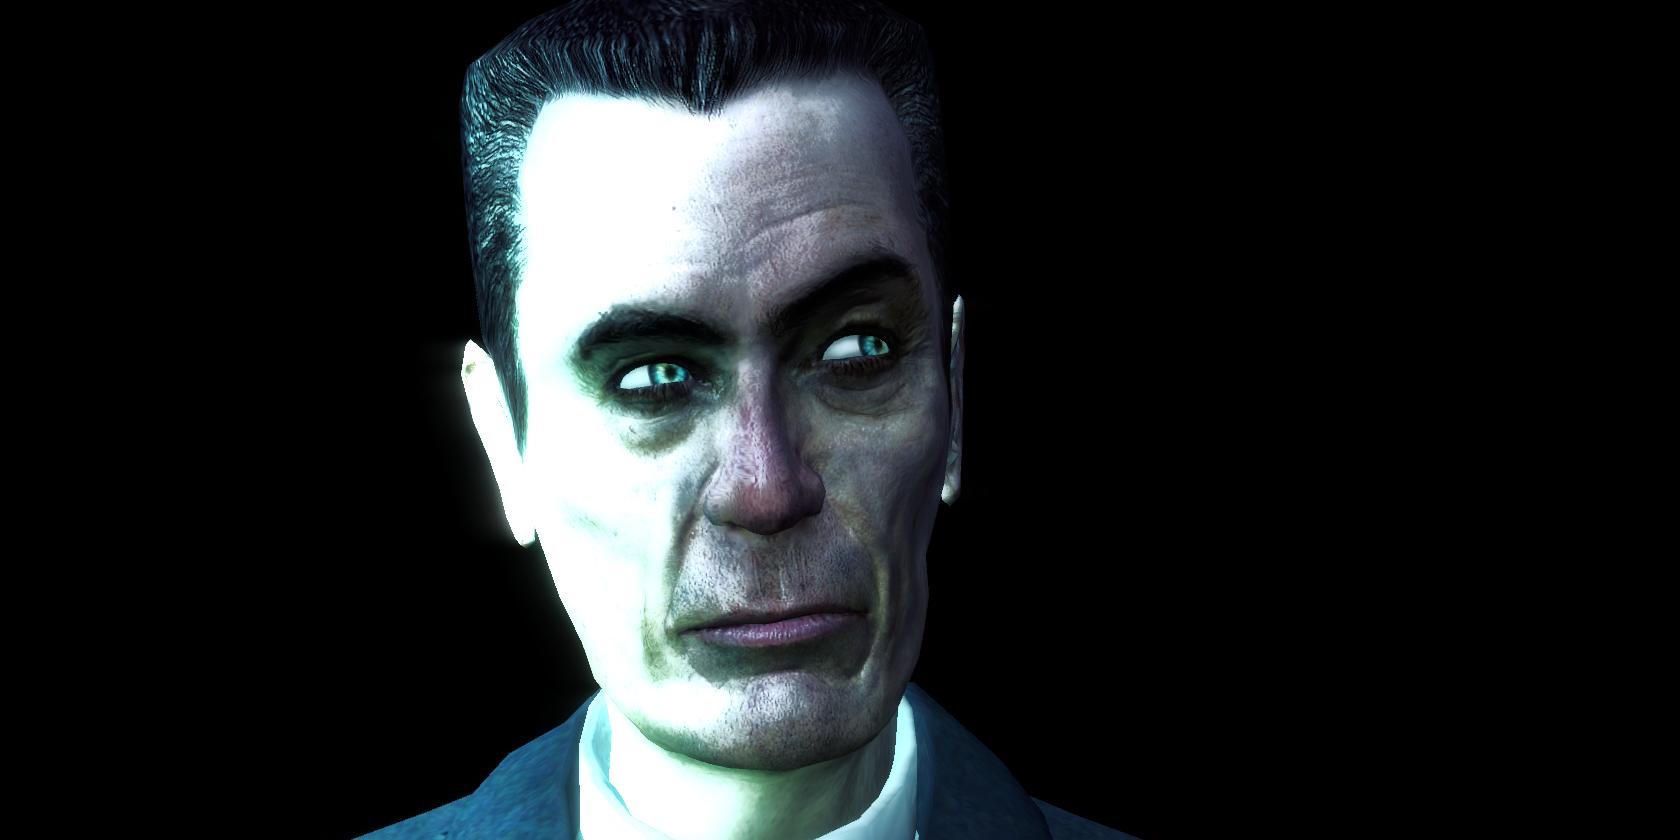 G-Man in Half-Life 2 looking ghostly